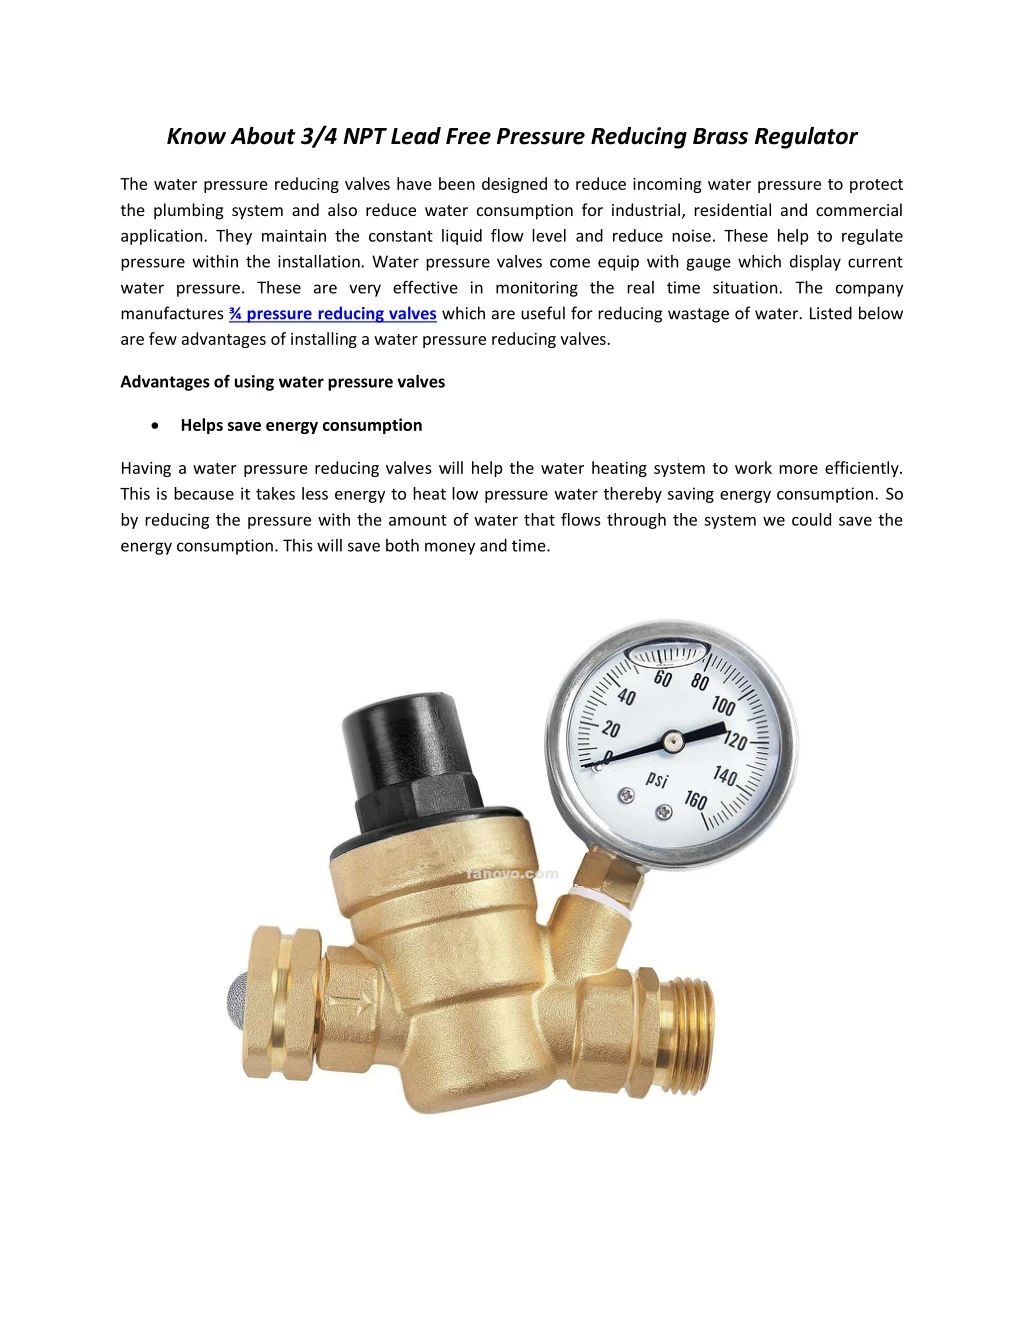 know about 3 4 npt lead free pressure reducing